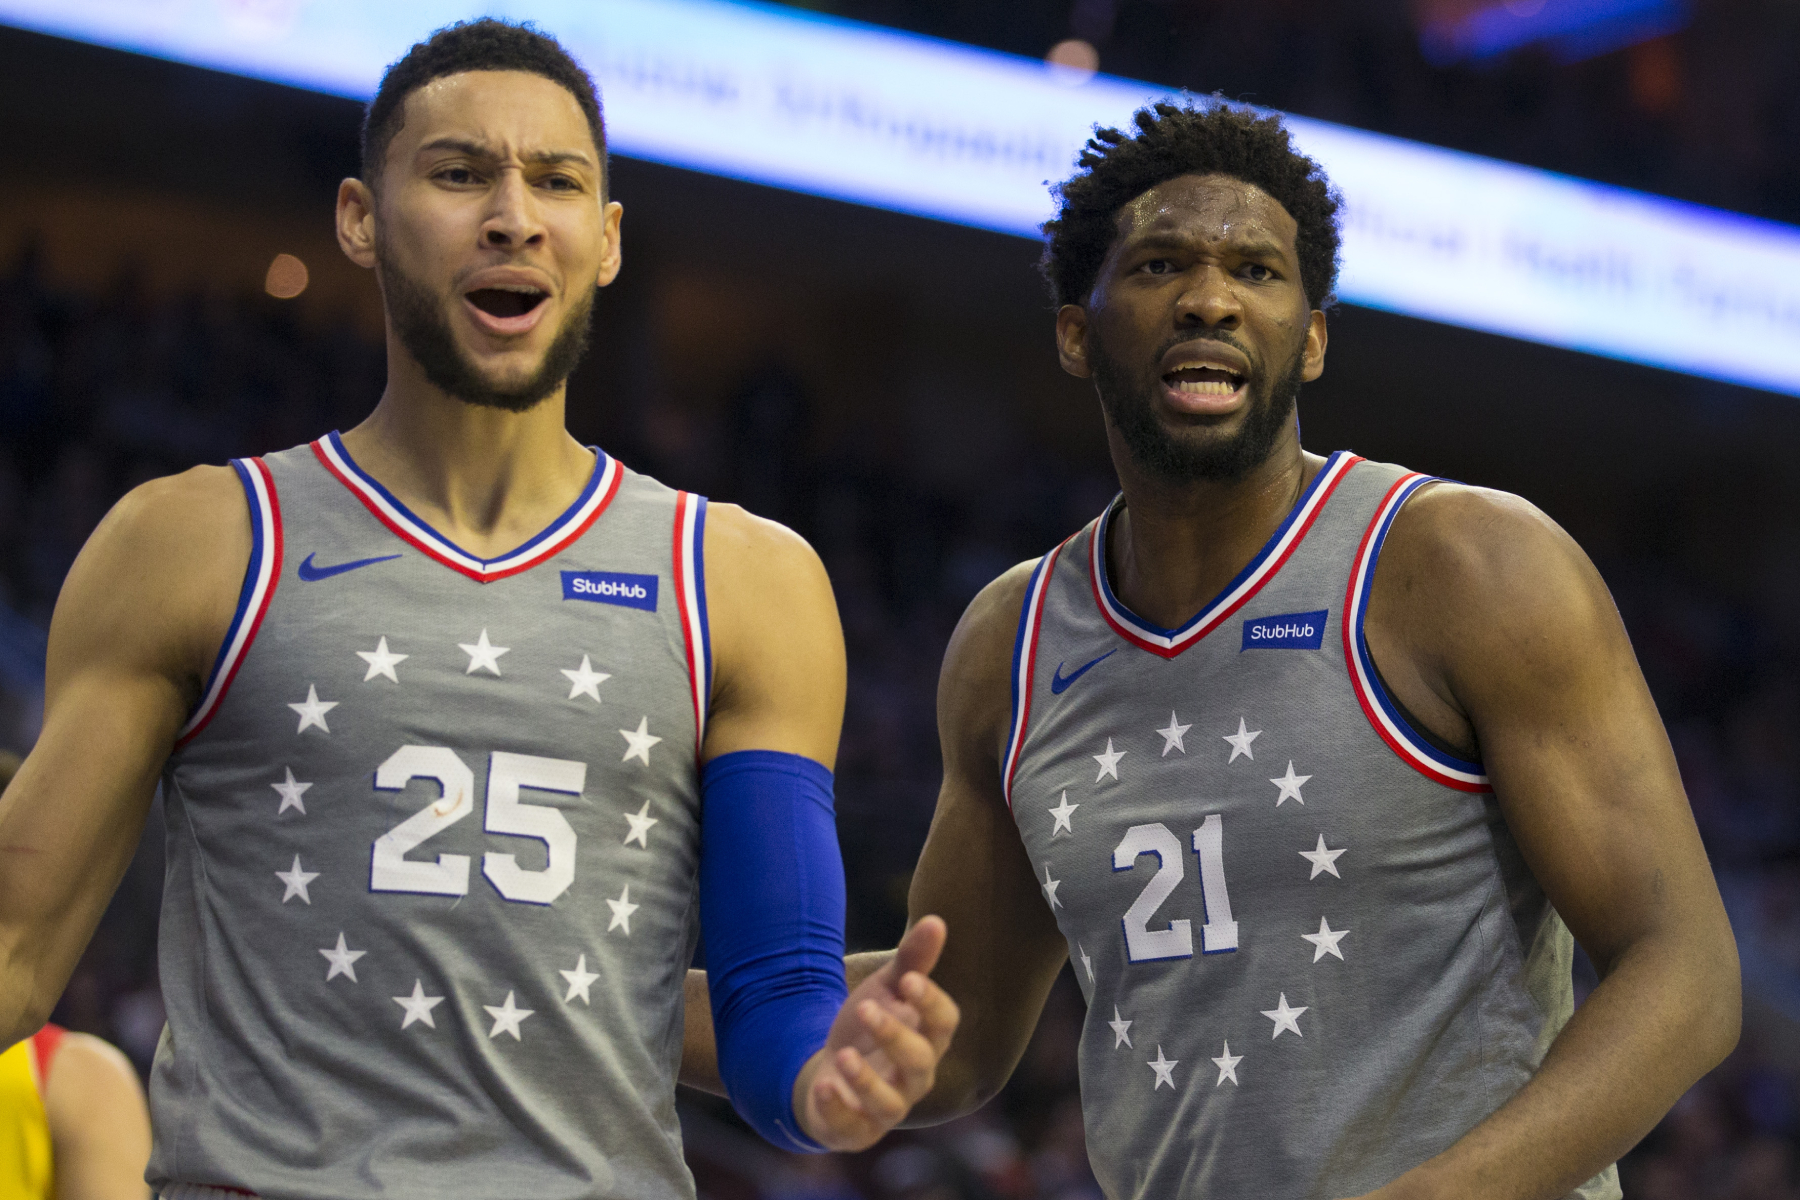 Ben Simmons, Joel Embiid, and the Philadelphia 76ers can go really far in the playoffs. However, their worst nightmare could be coming true.